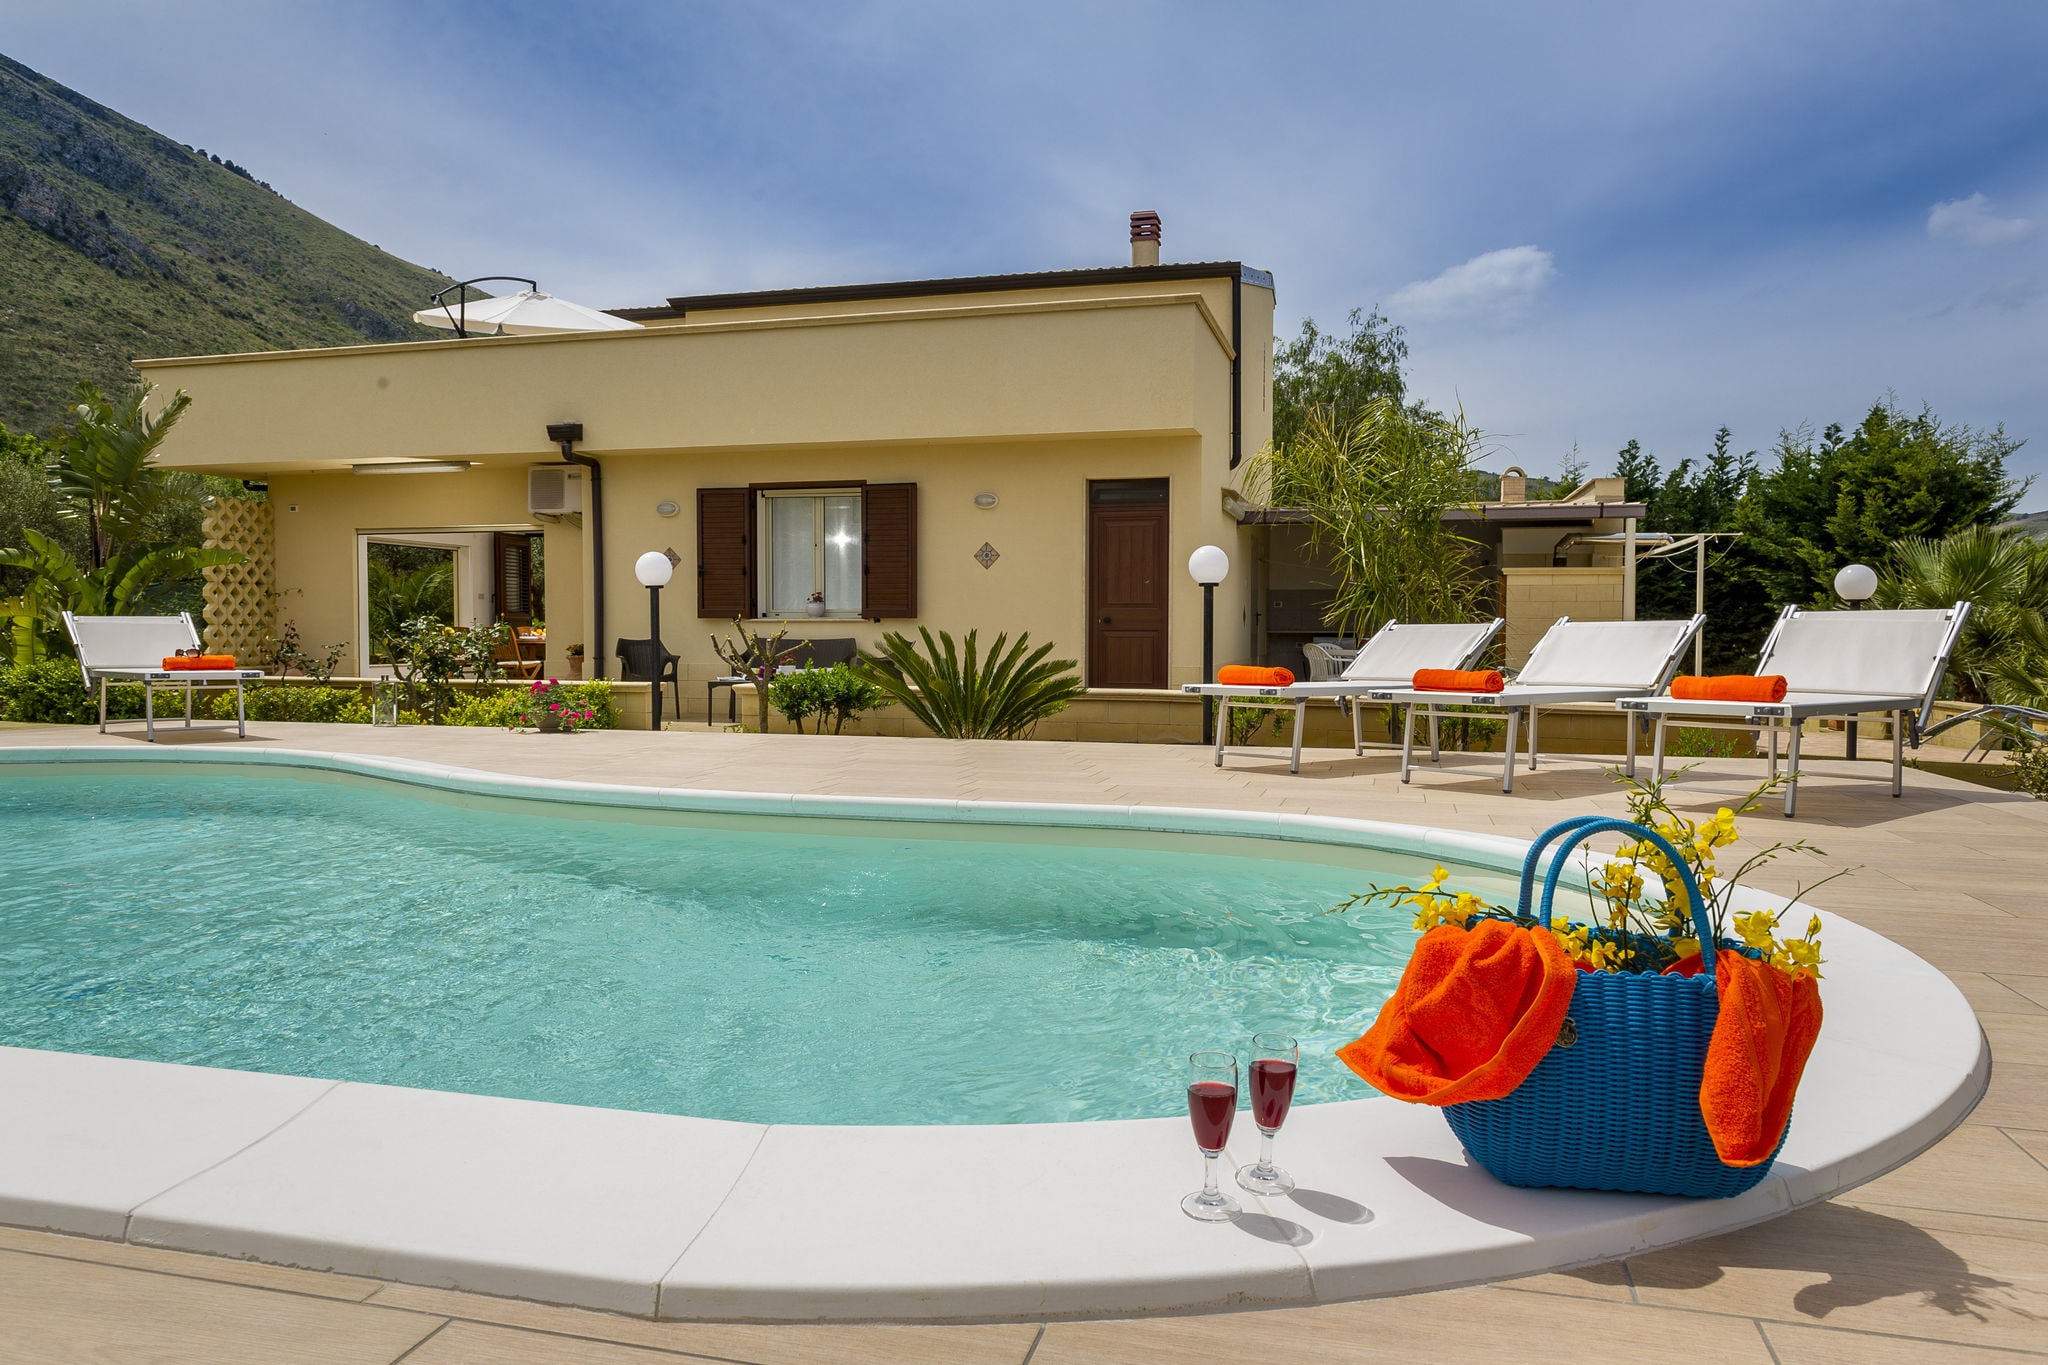 Beautiful detached villa with private pool surrounded by hills and nature.